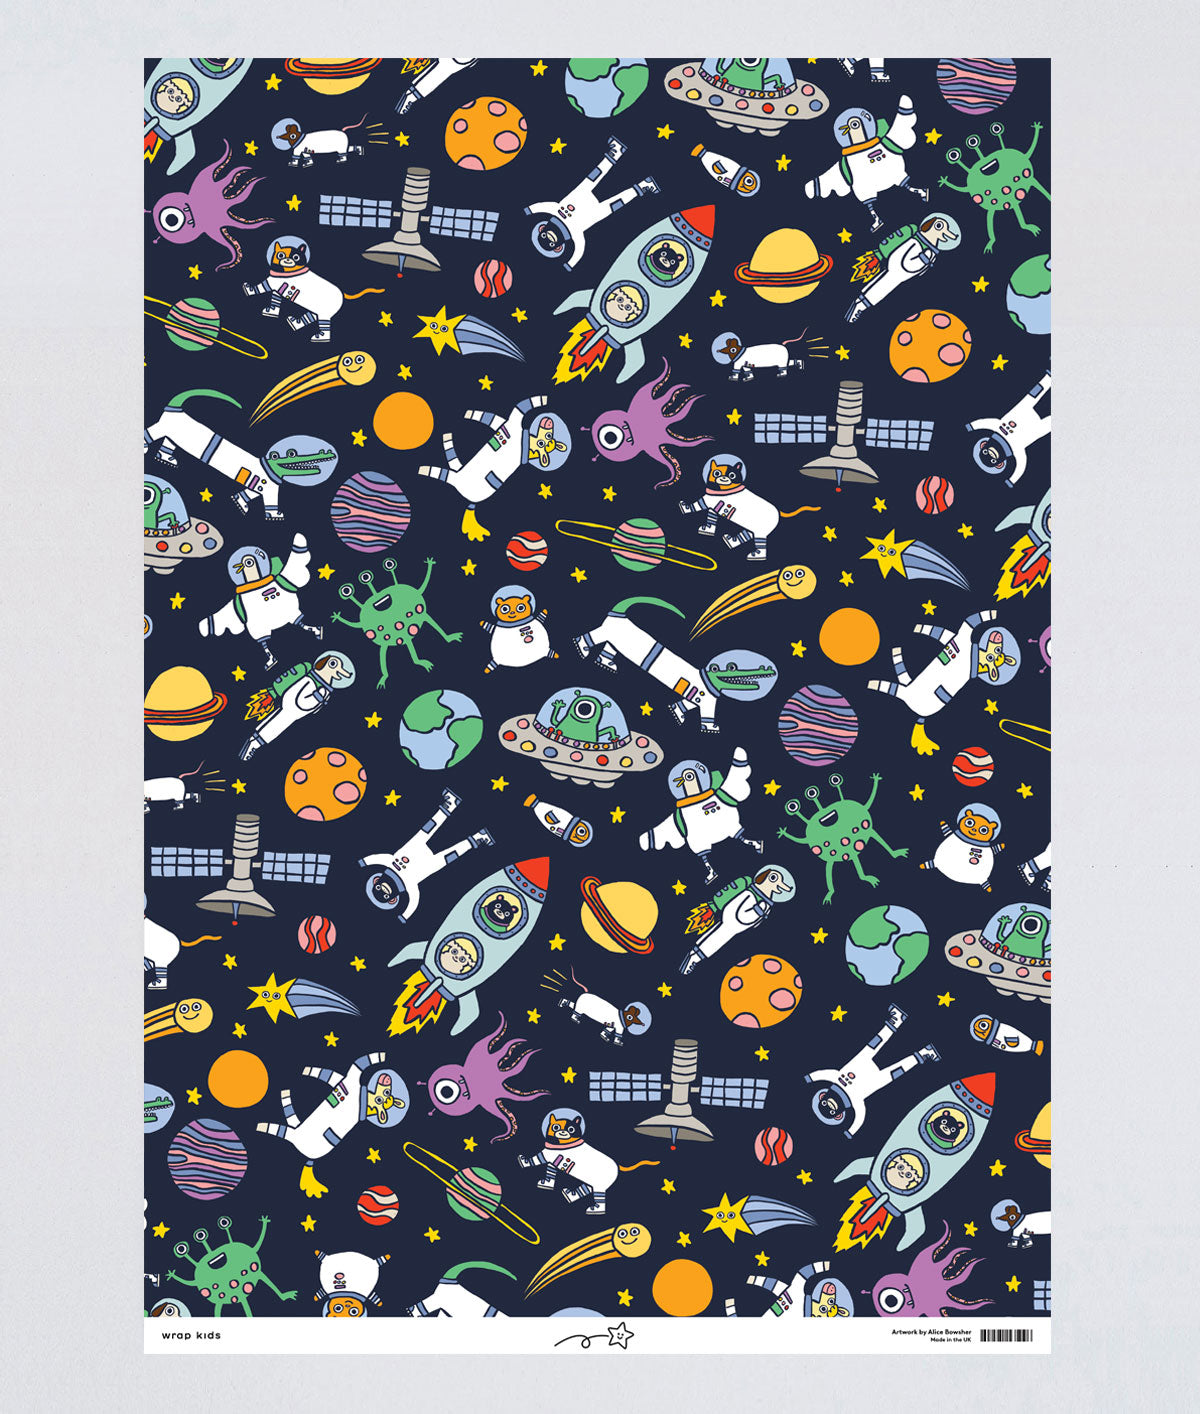 Space Kids Wrapping Paper